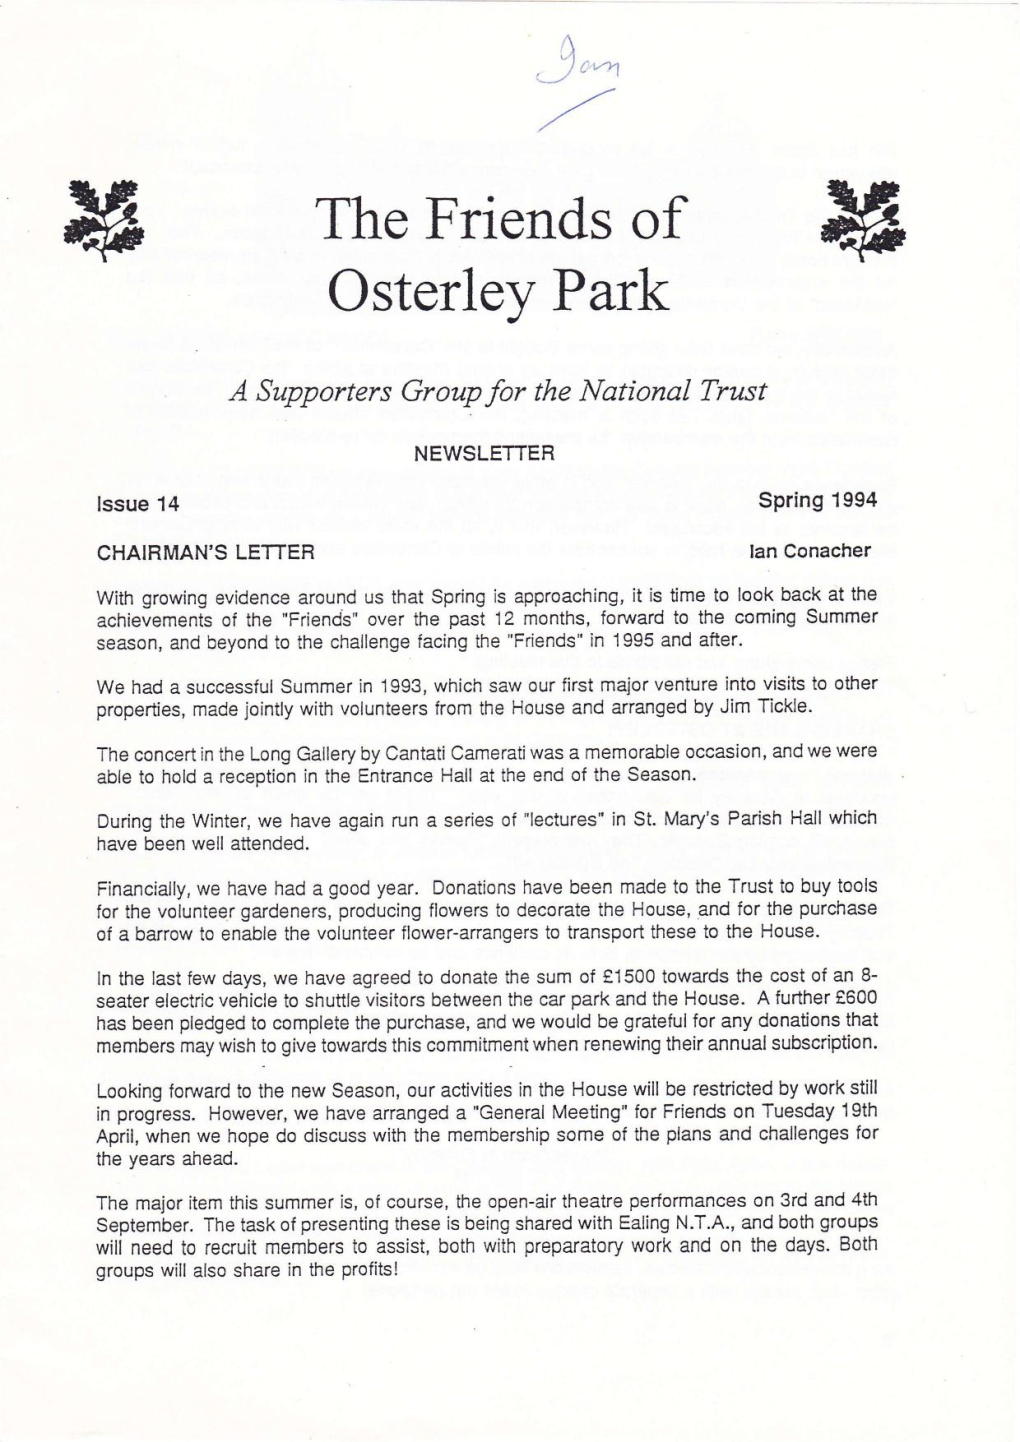 The Friends of Osterley Park